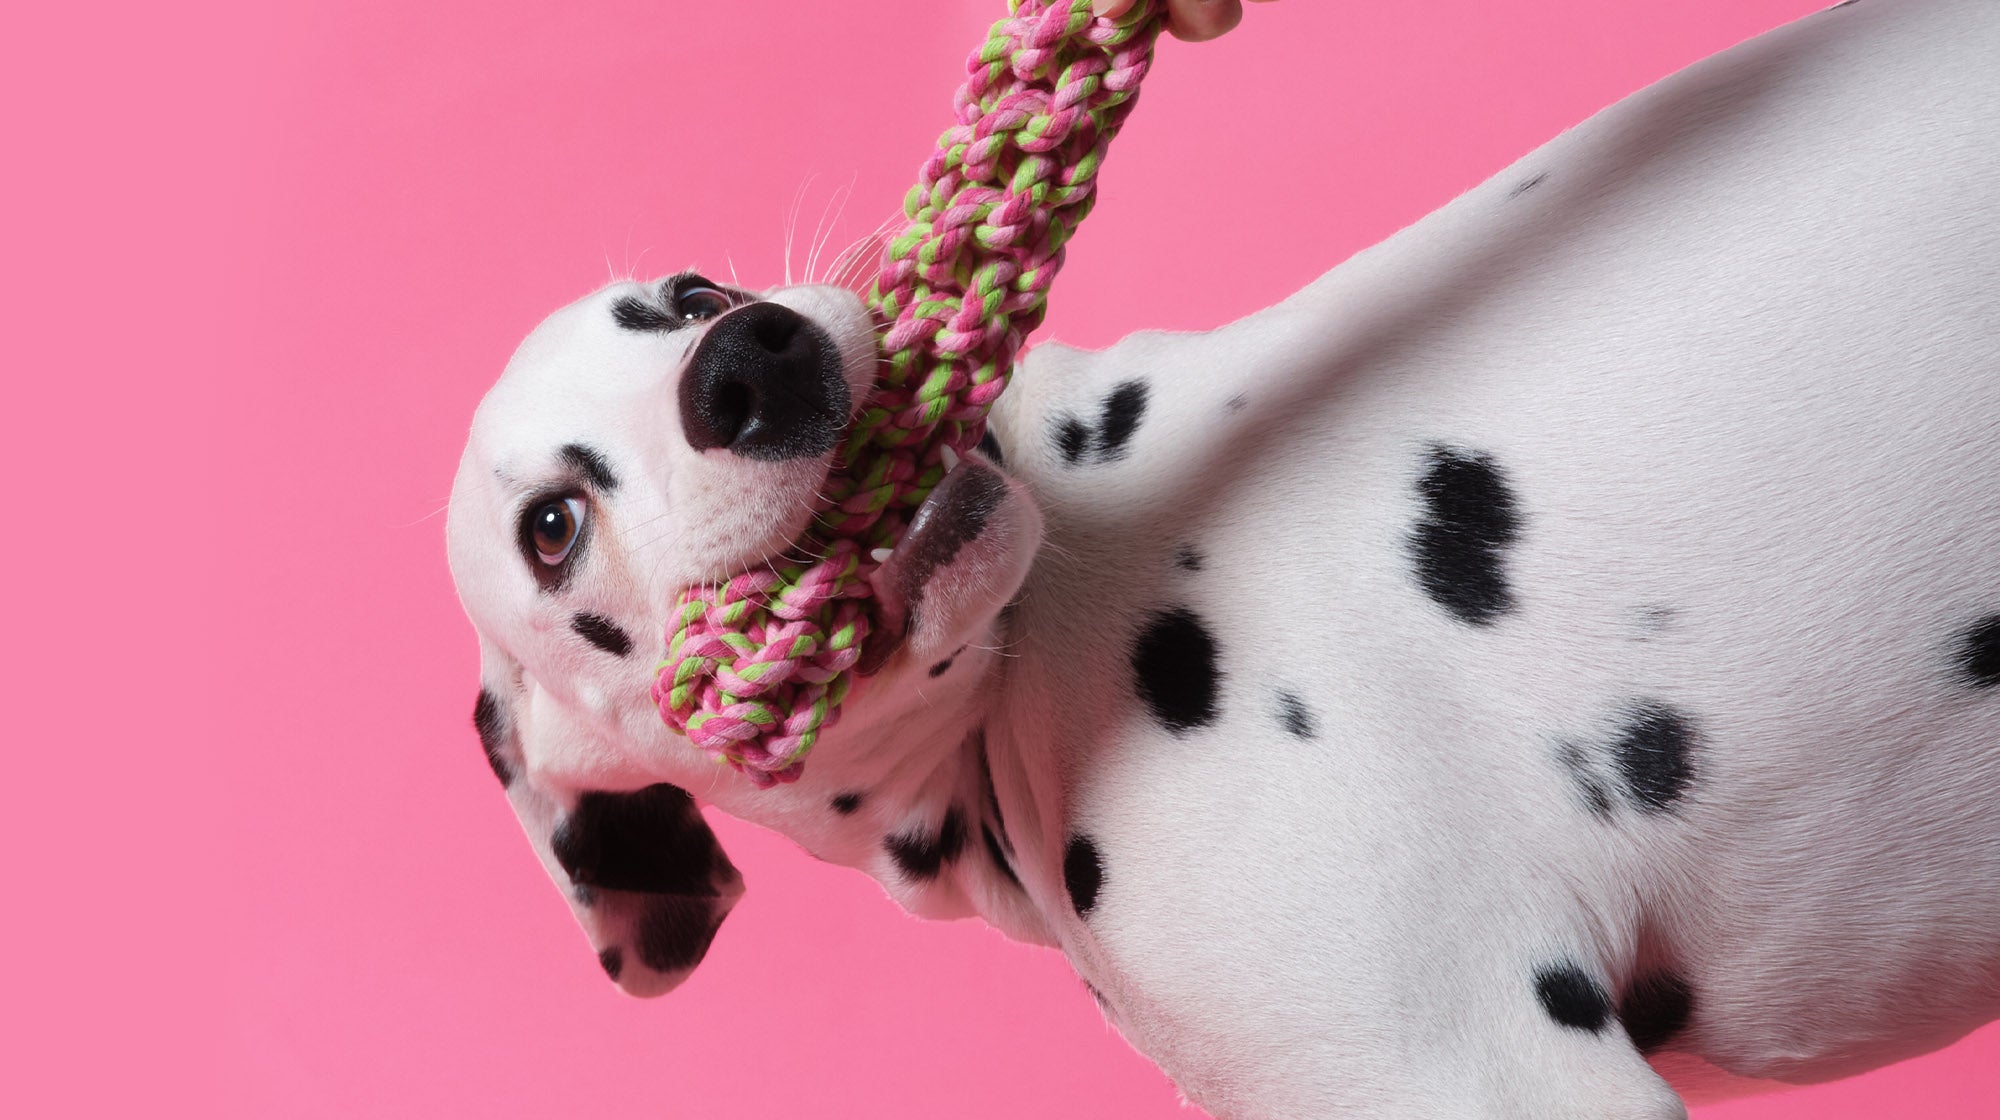 Why your dog needs enrichment toys